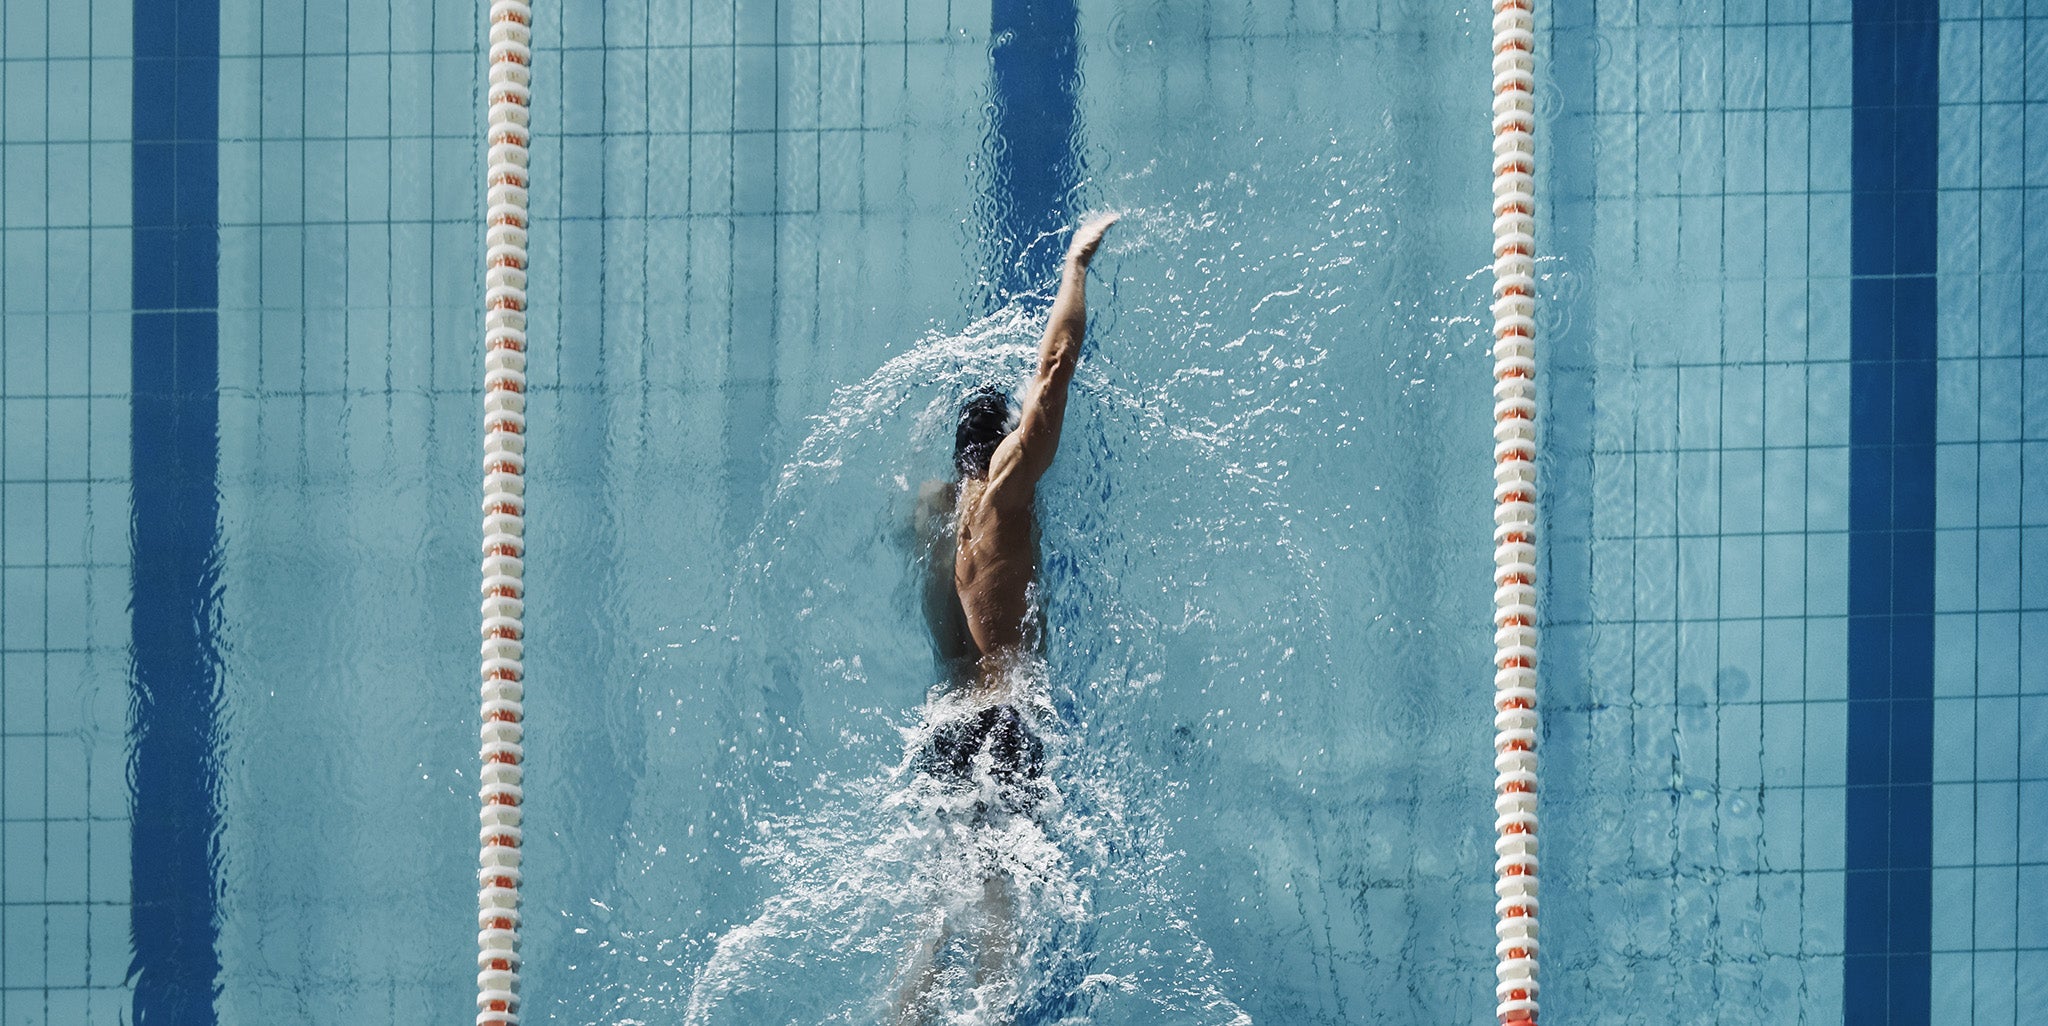 Overhead view of man swimming in a lane pool